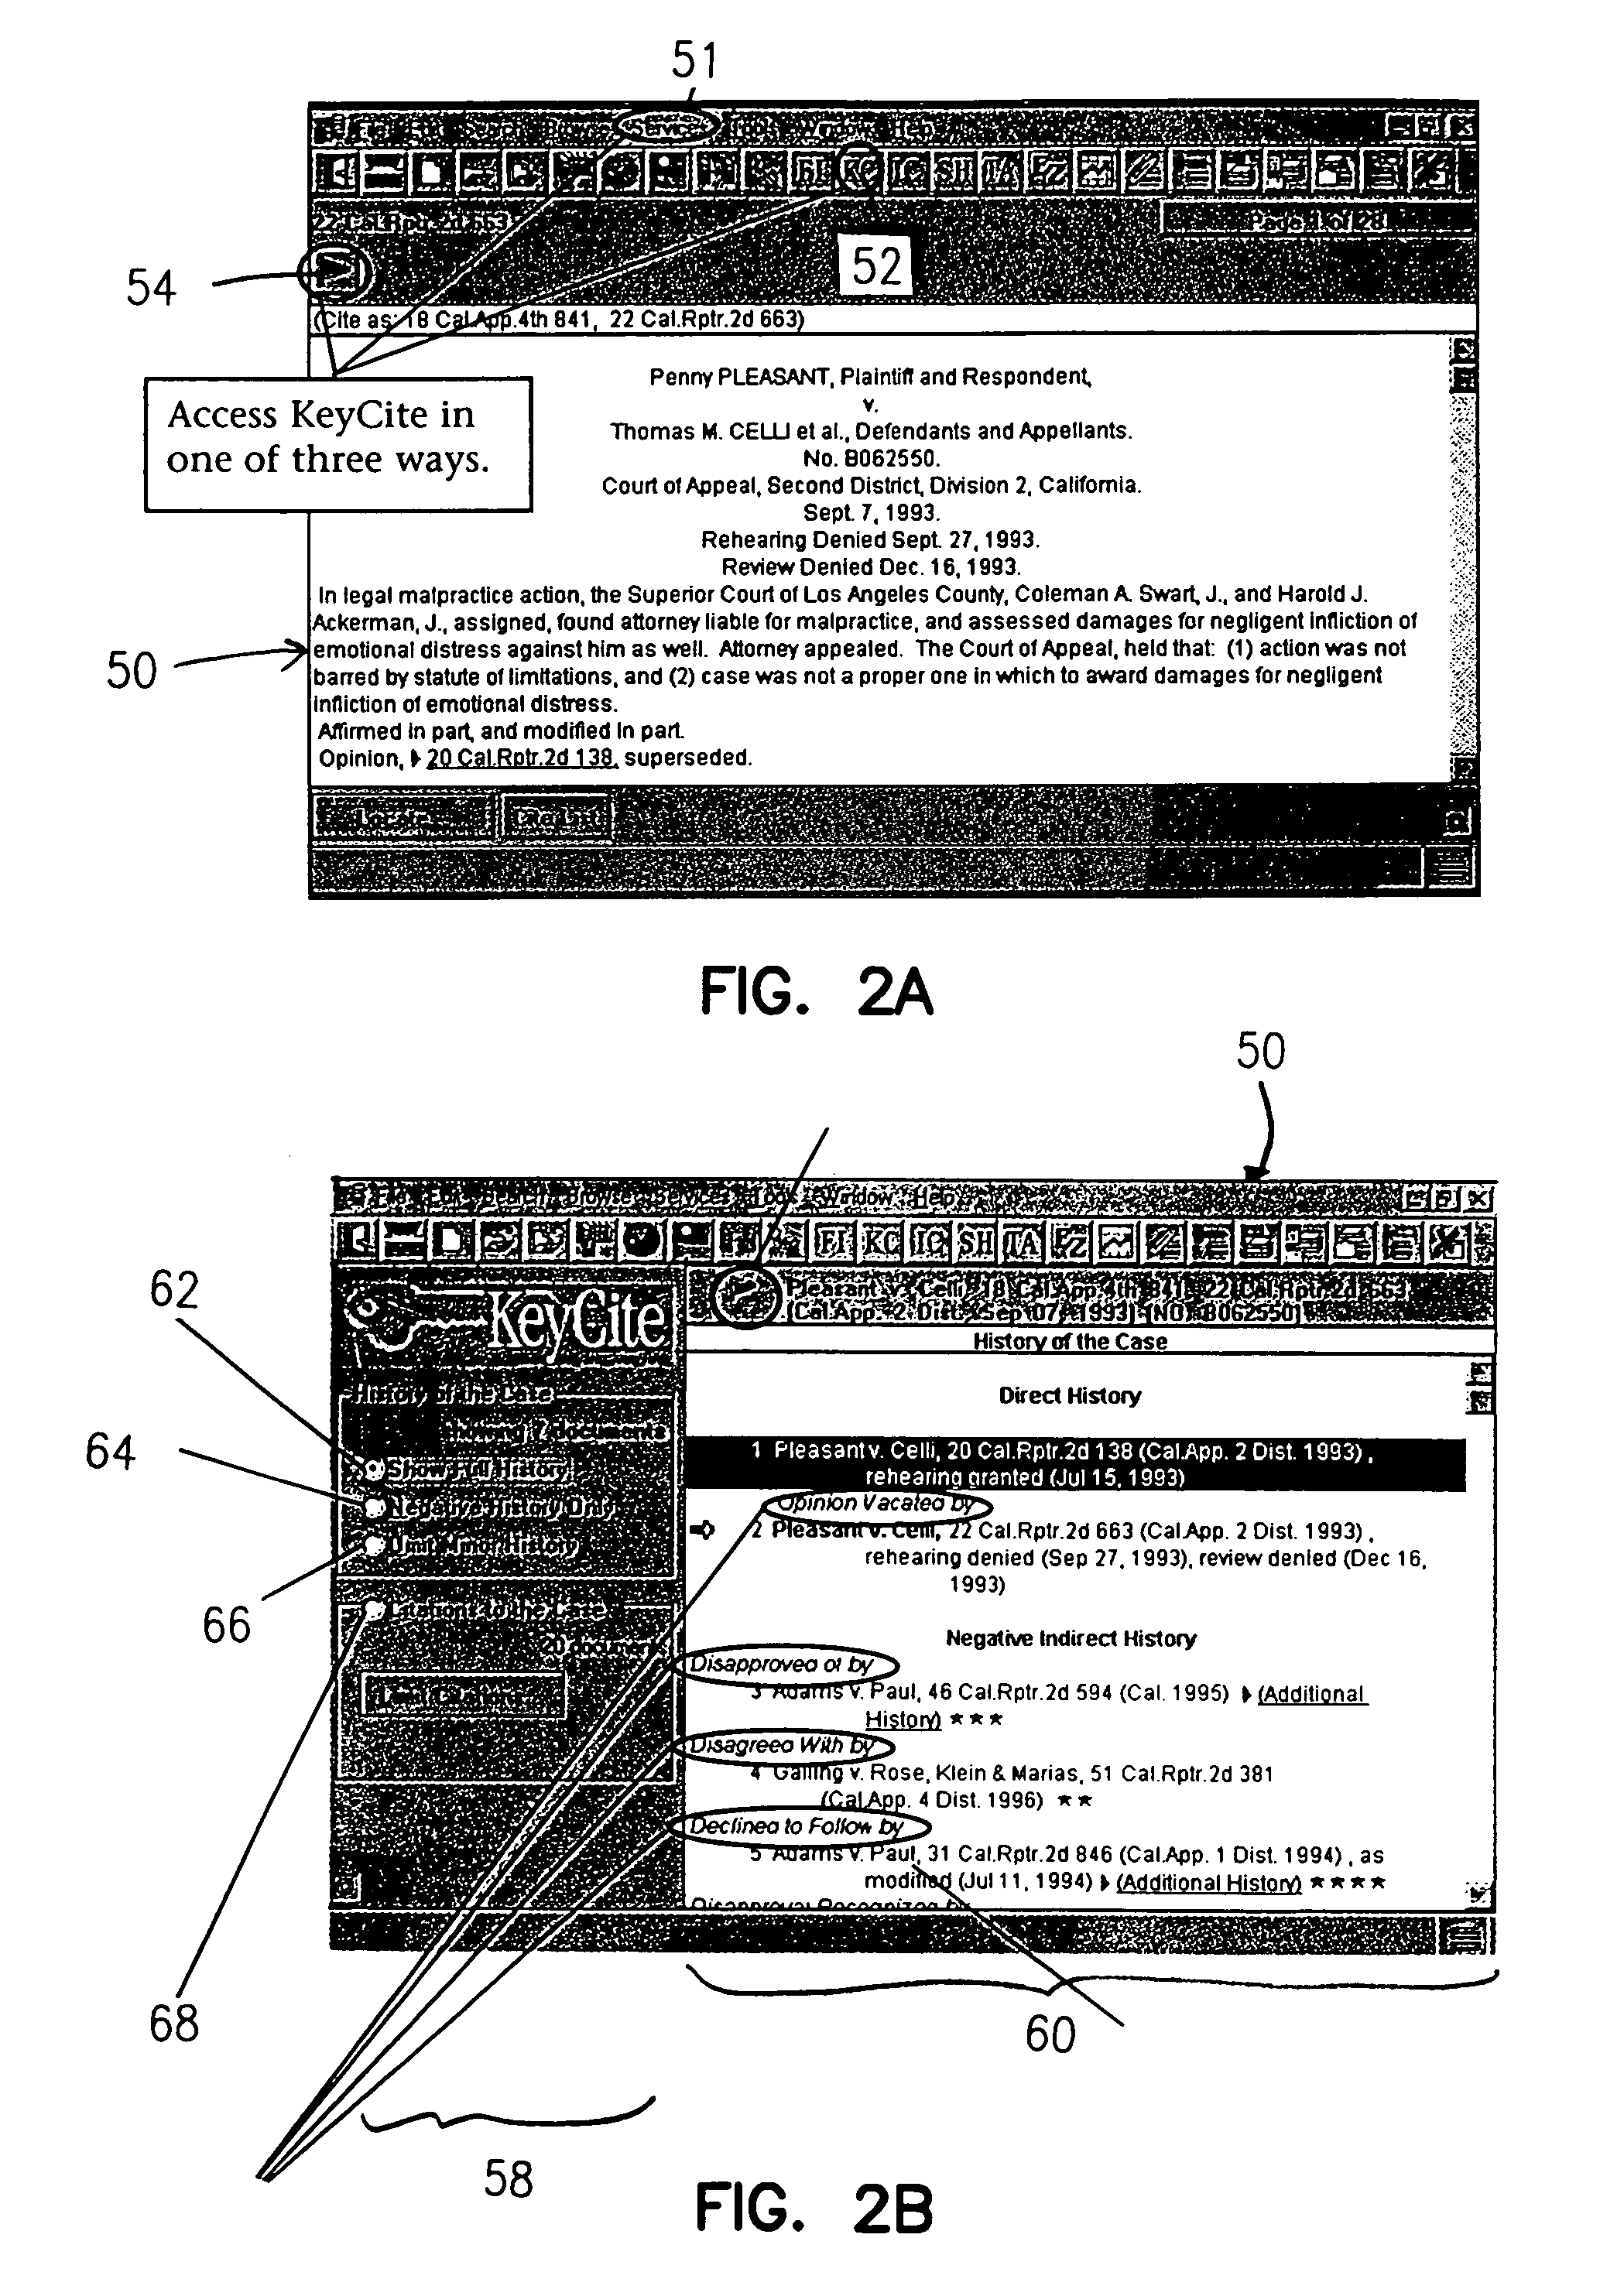 System and method for processing formatted text documents in a database